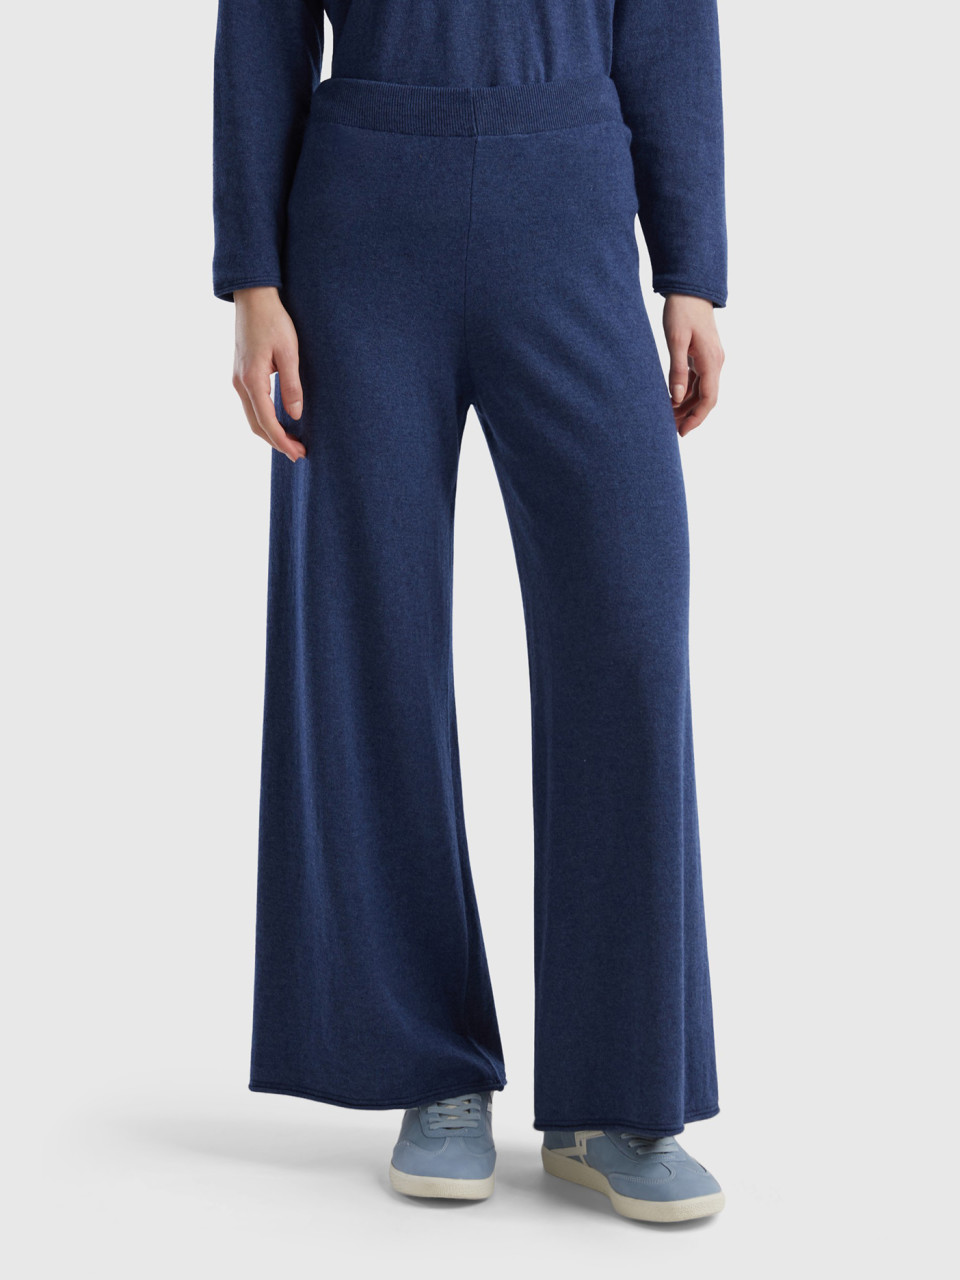 Benetton, Air Force Blue Wide Trousers In Cashmere And Wool Blend, Air Force Blue, Women